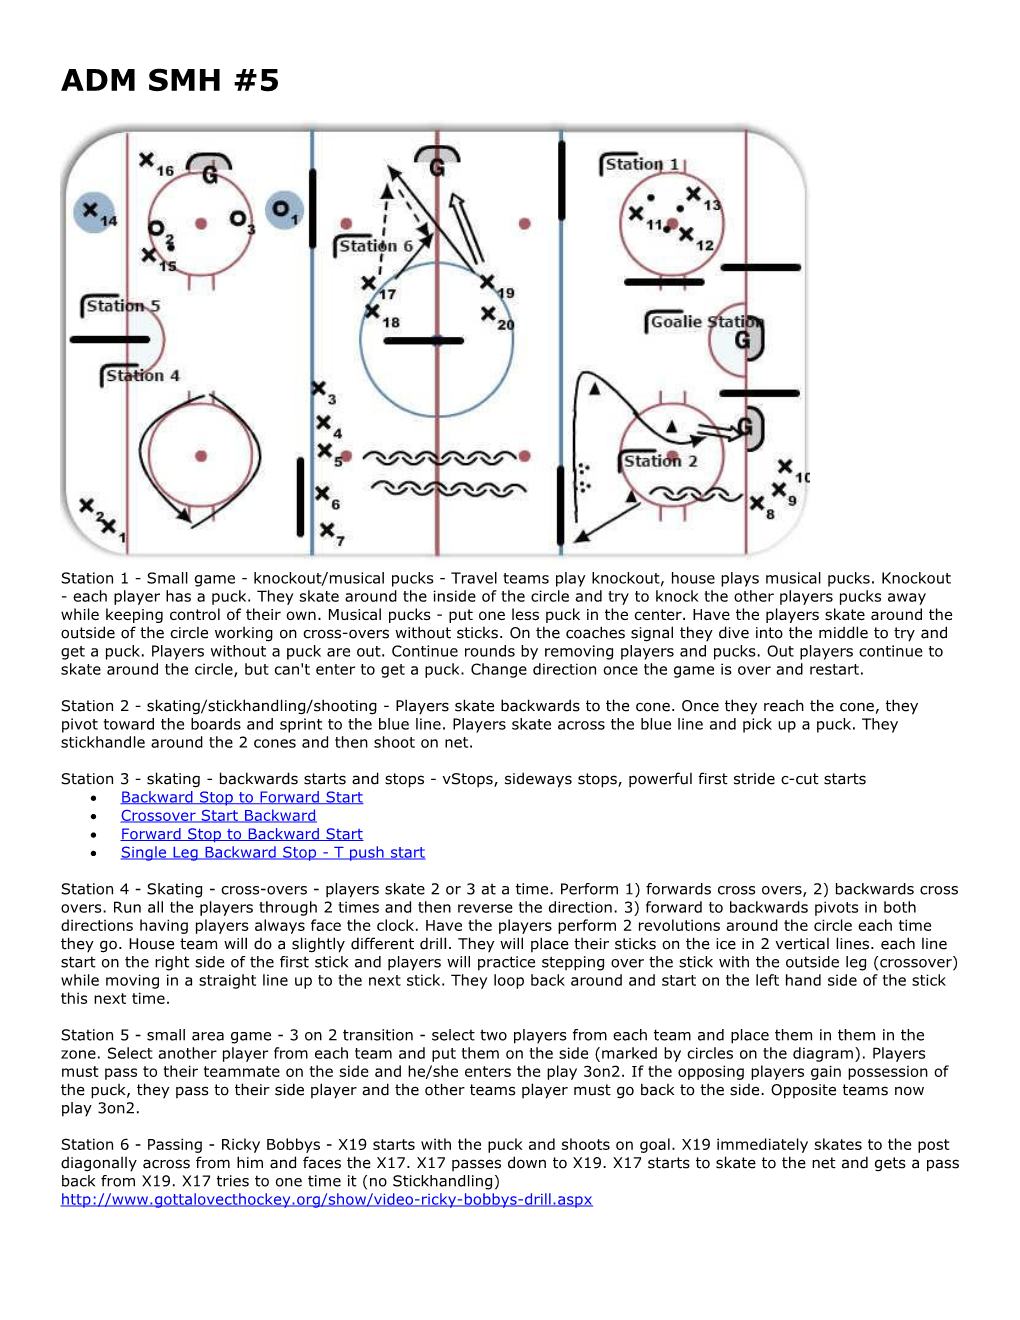 Station 1 - Small Game - Knockout/Musical Pucks - Travel Teams Play Knockout, House Plays